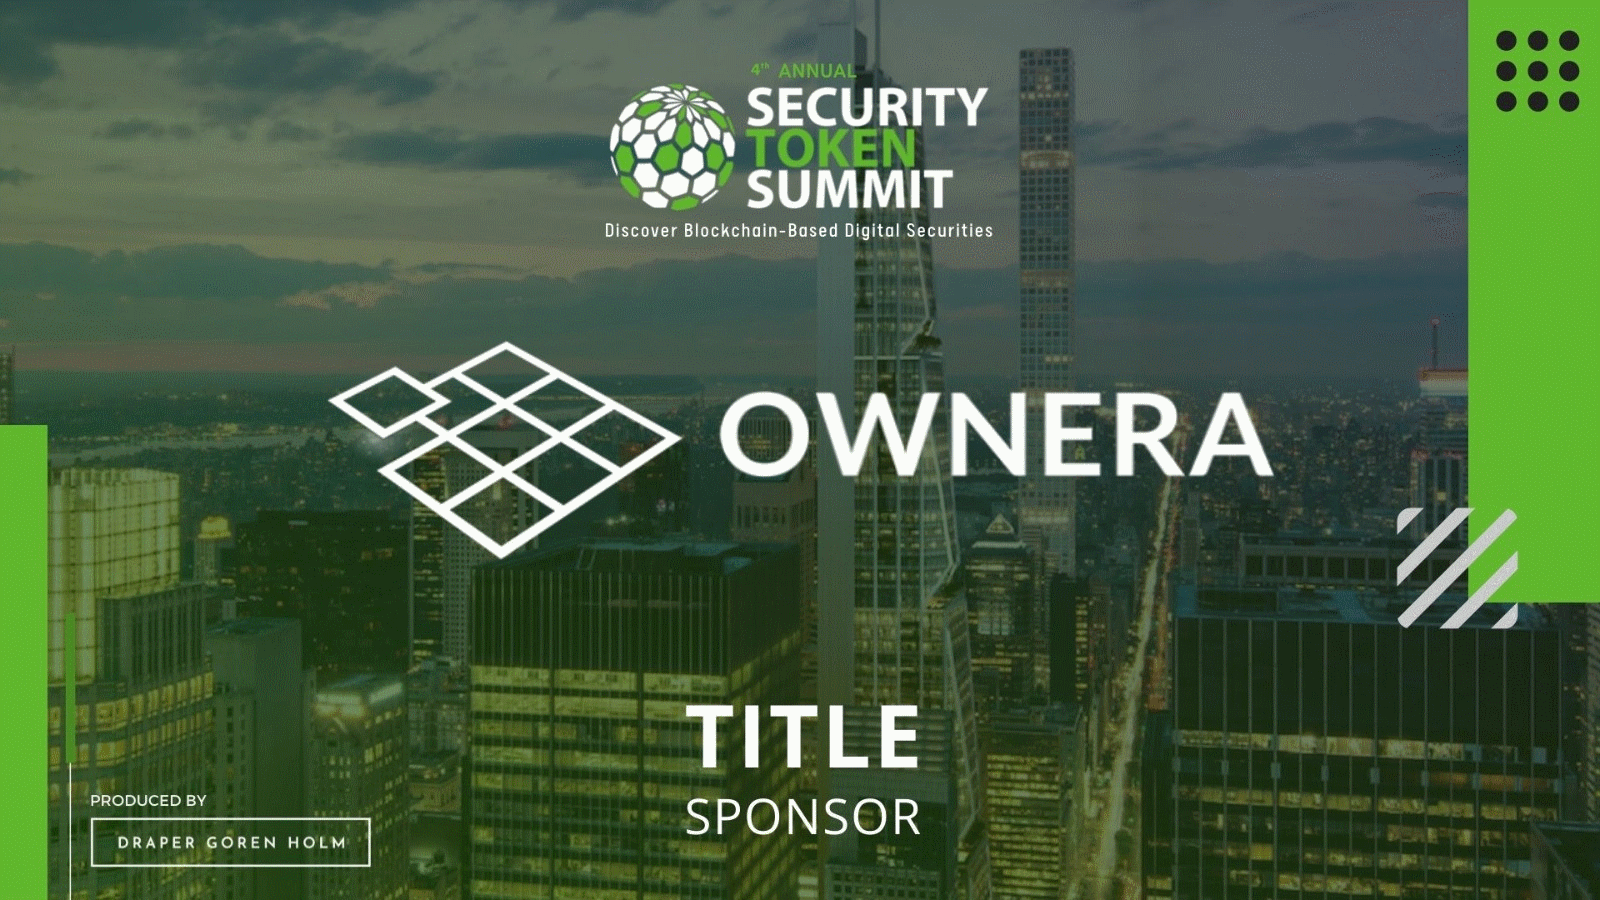 Ownera Named Title Sponsor of 4th Annual Security Token Summit this May in New York City